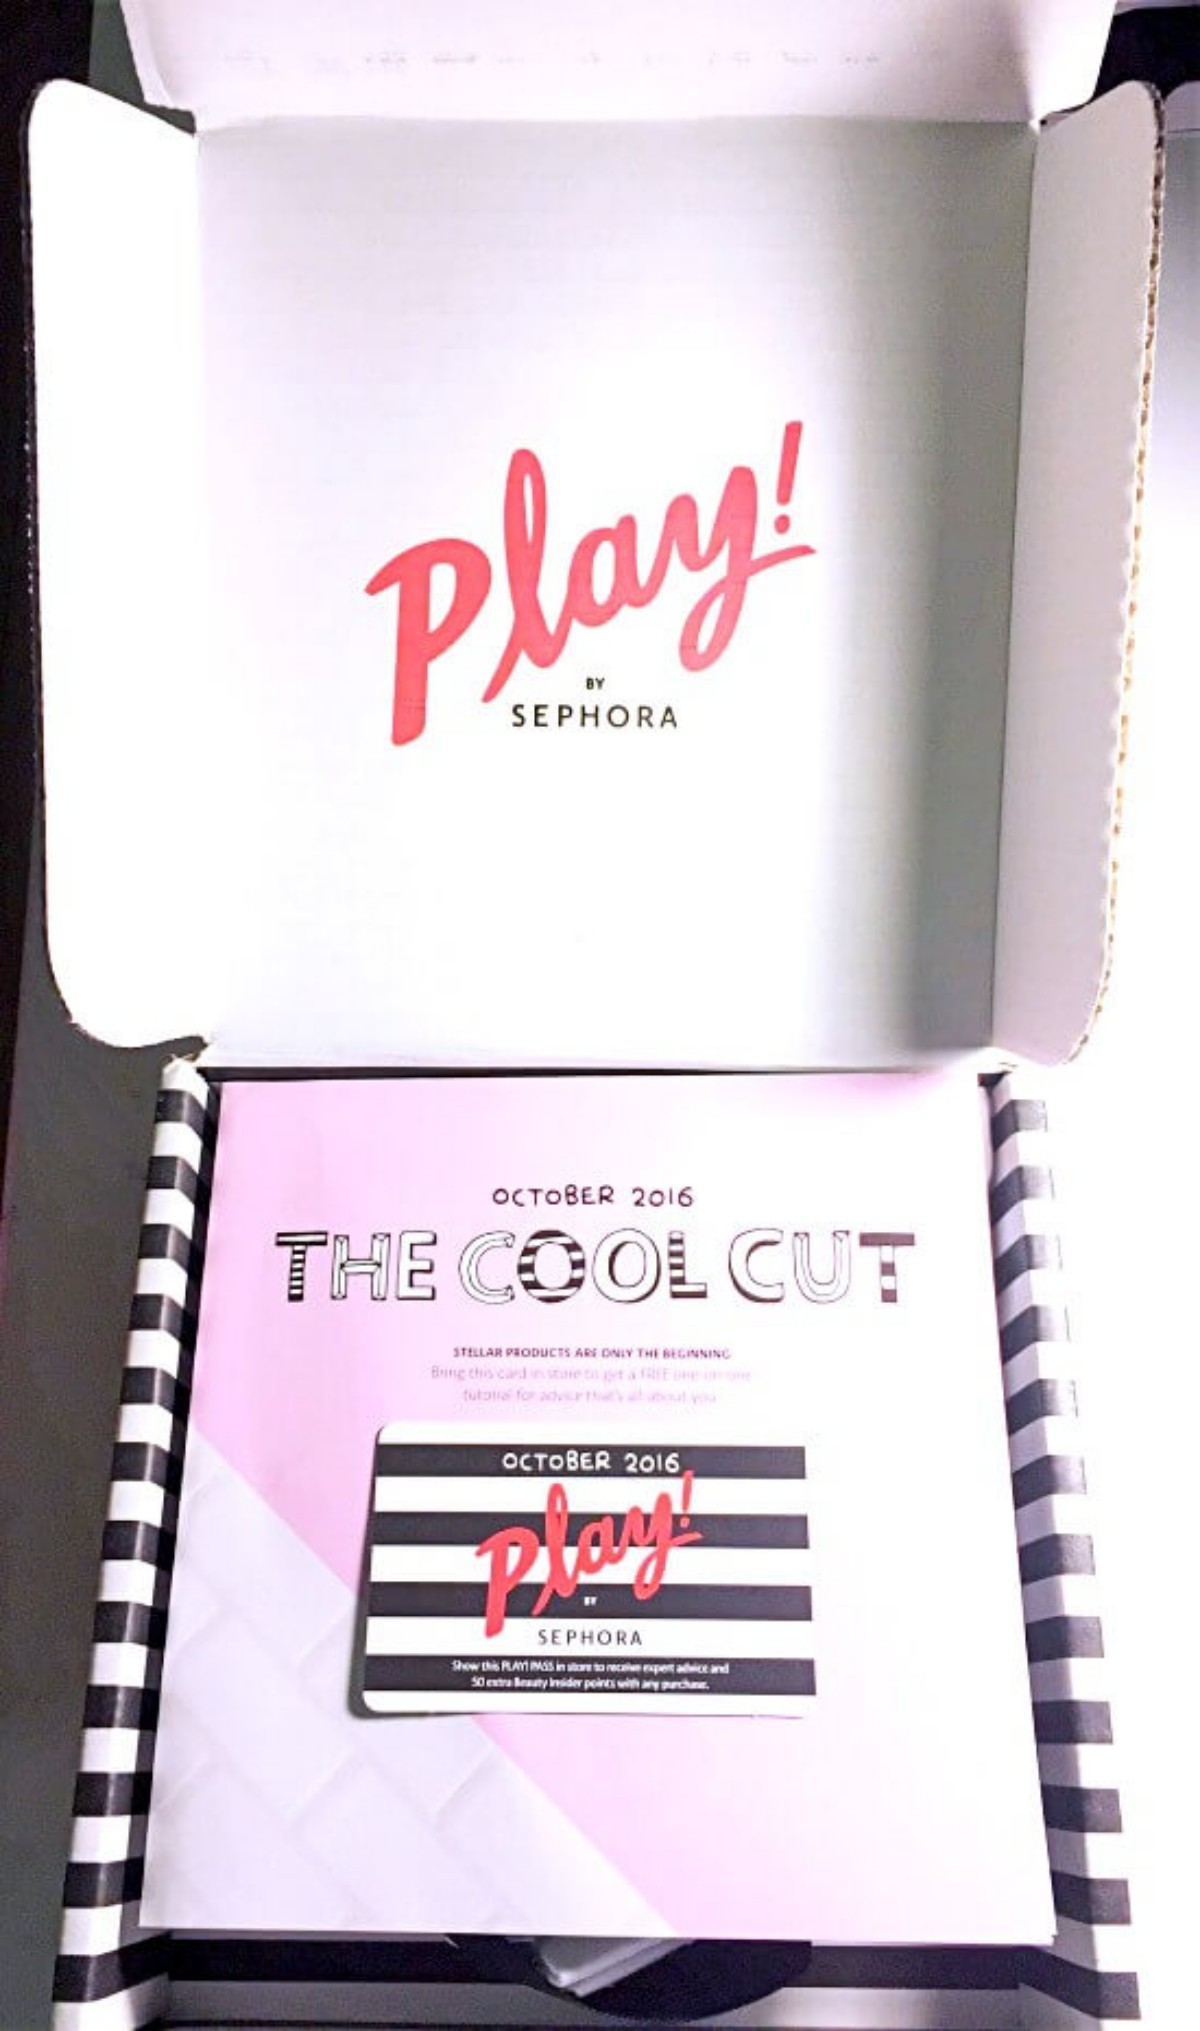 Play! by Sephora October 2016 review